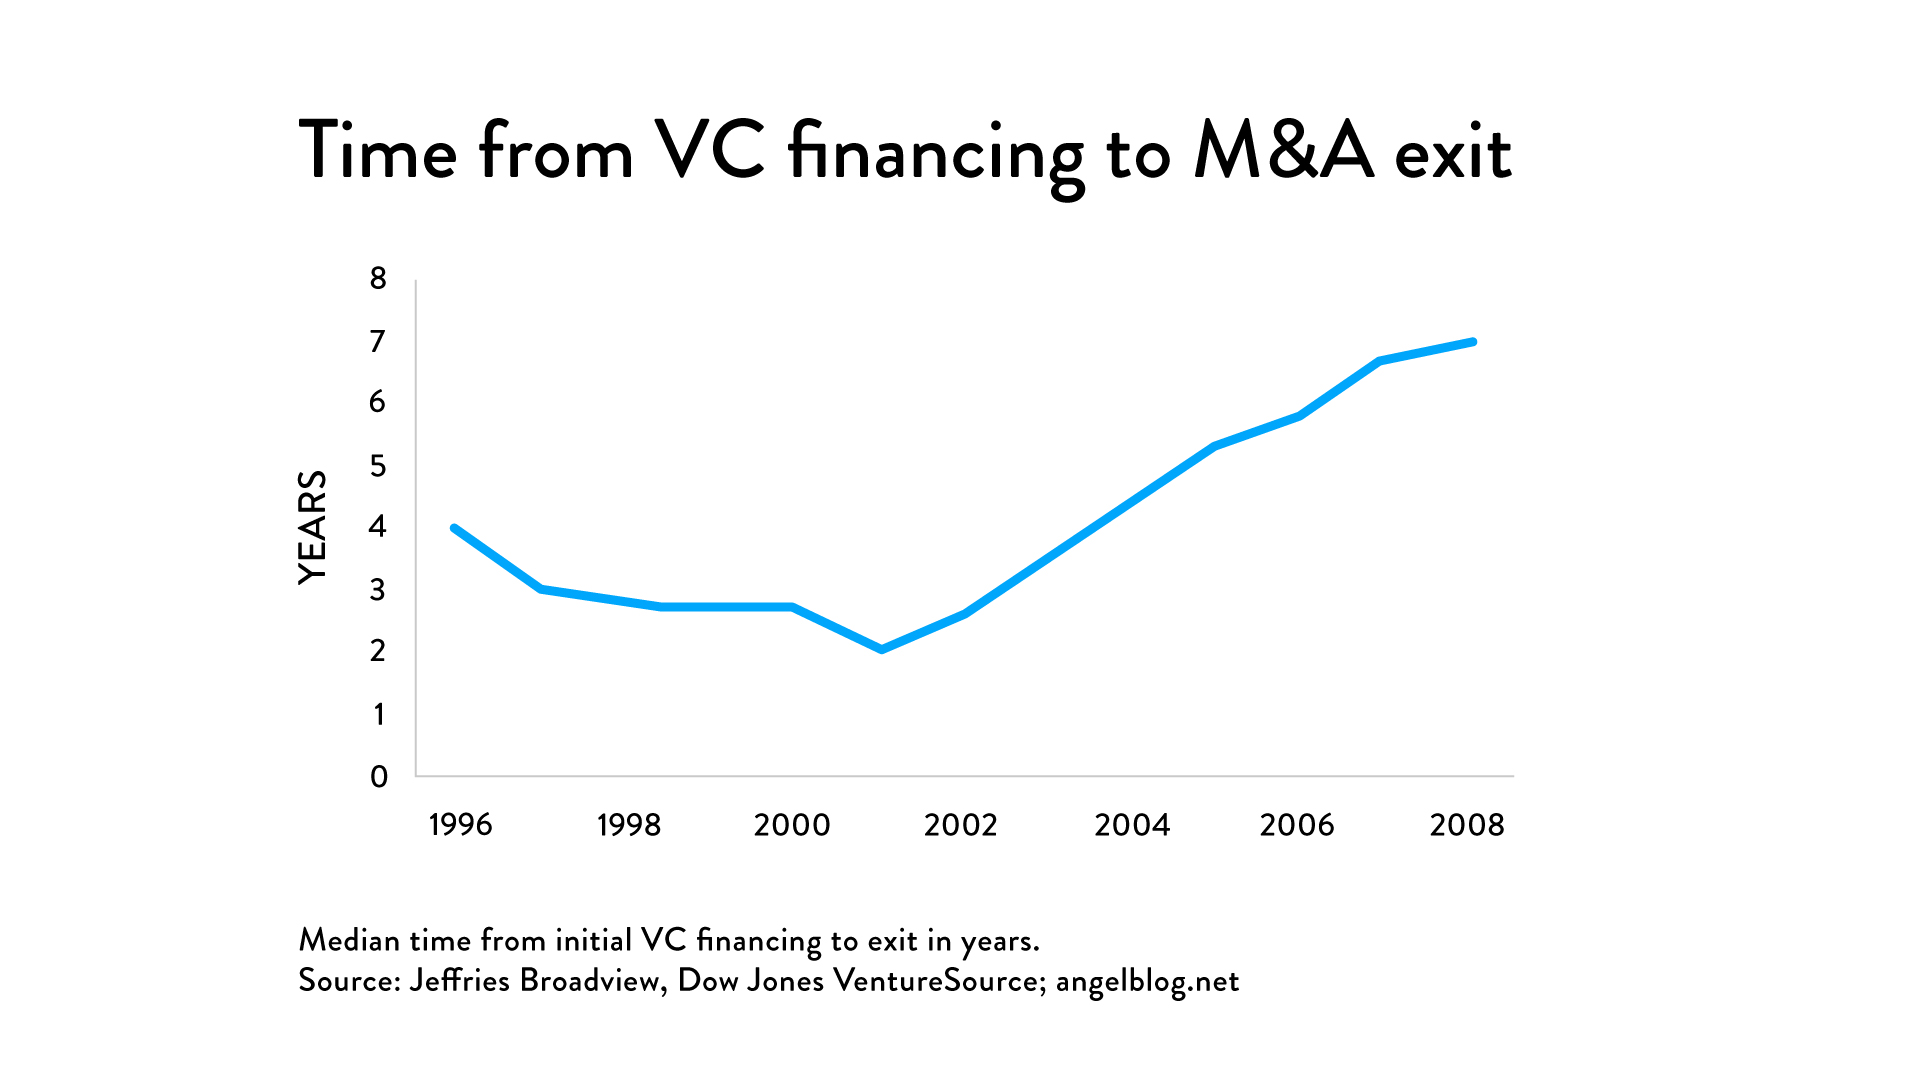 Venture capital timeline time from VC financing to exit